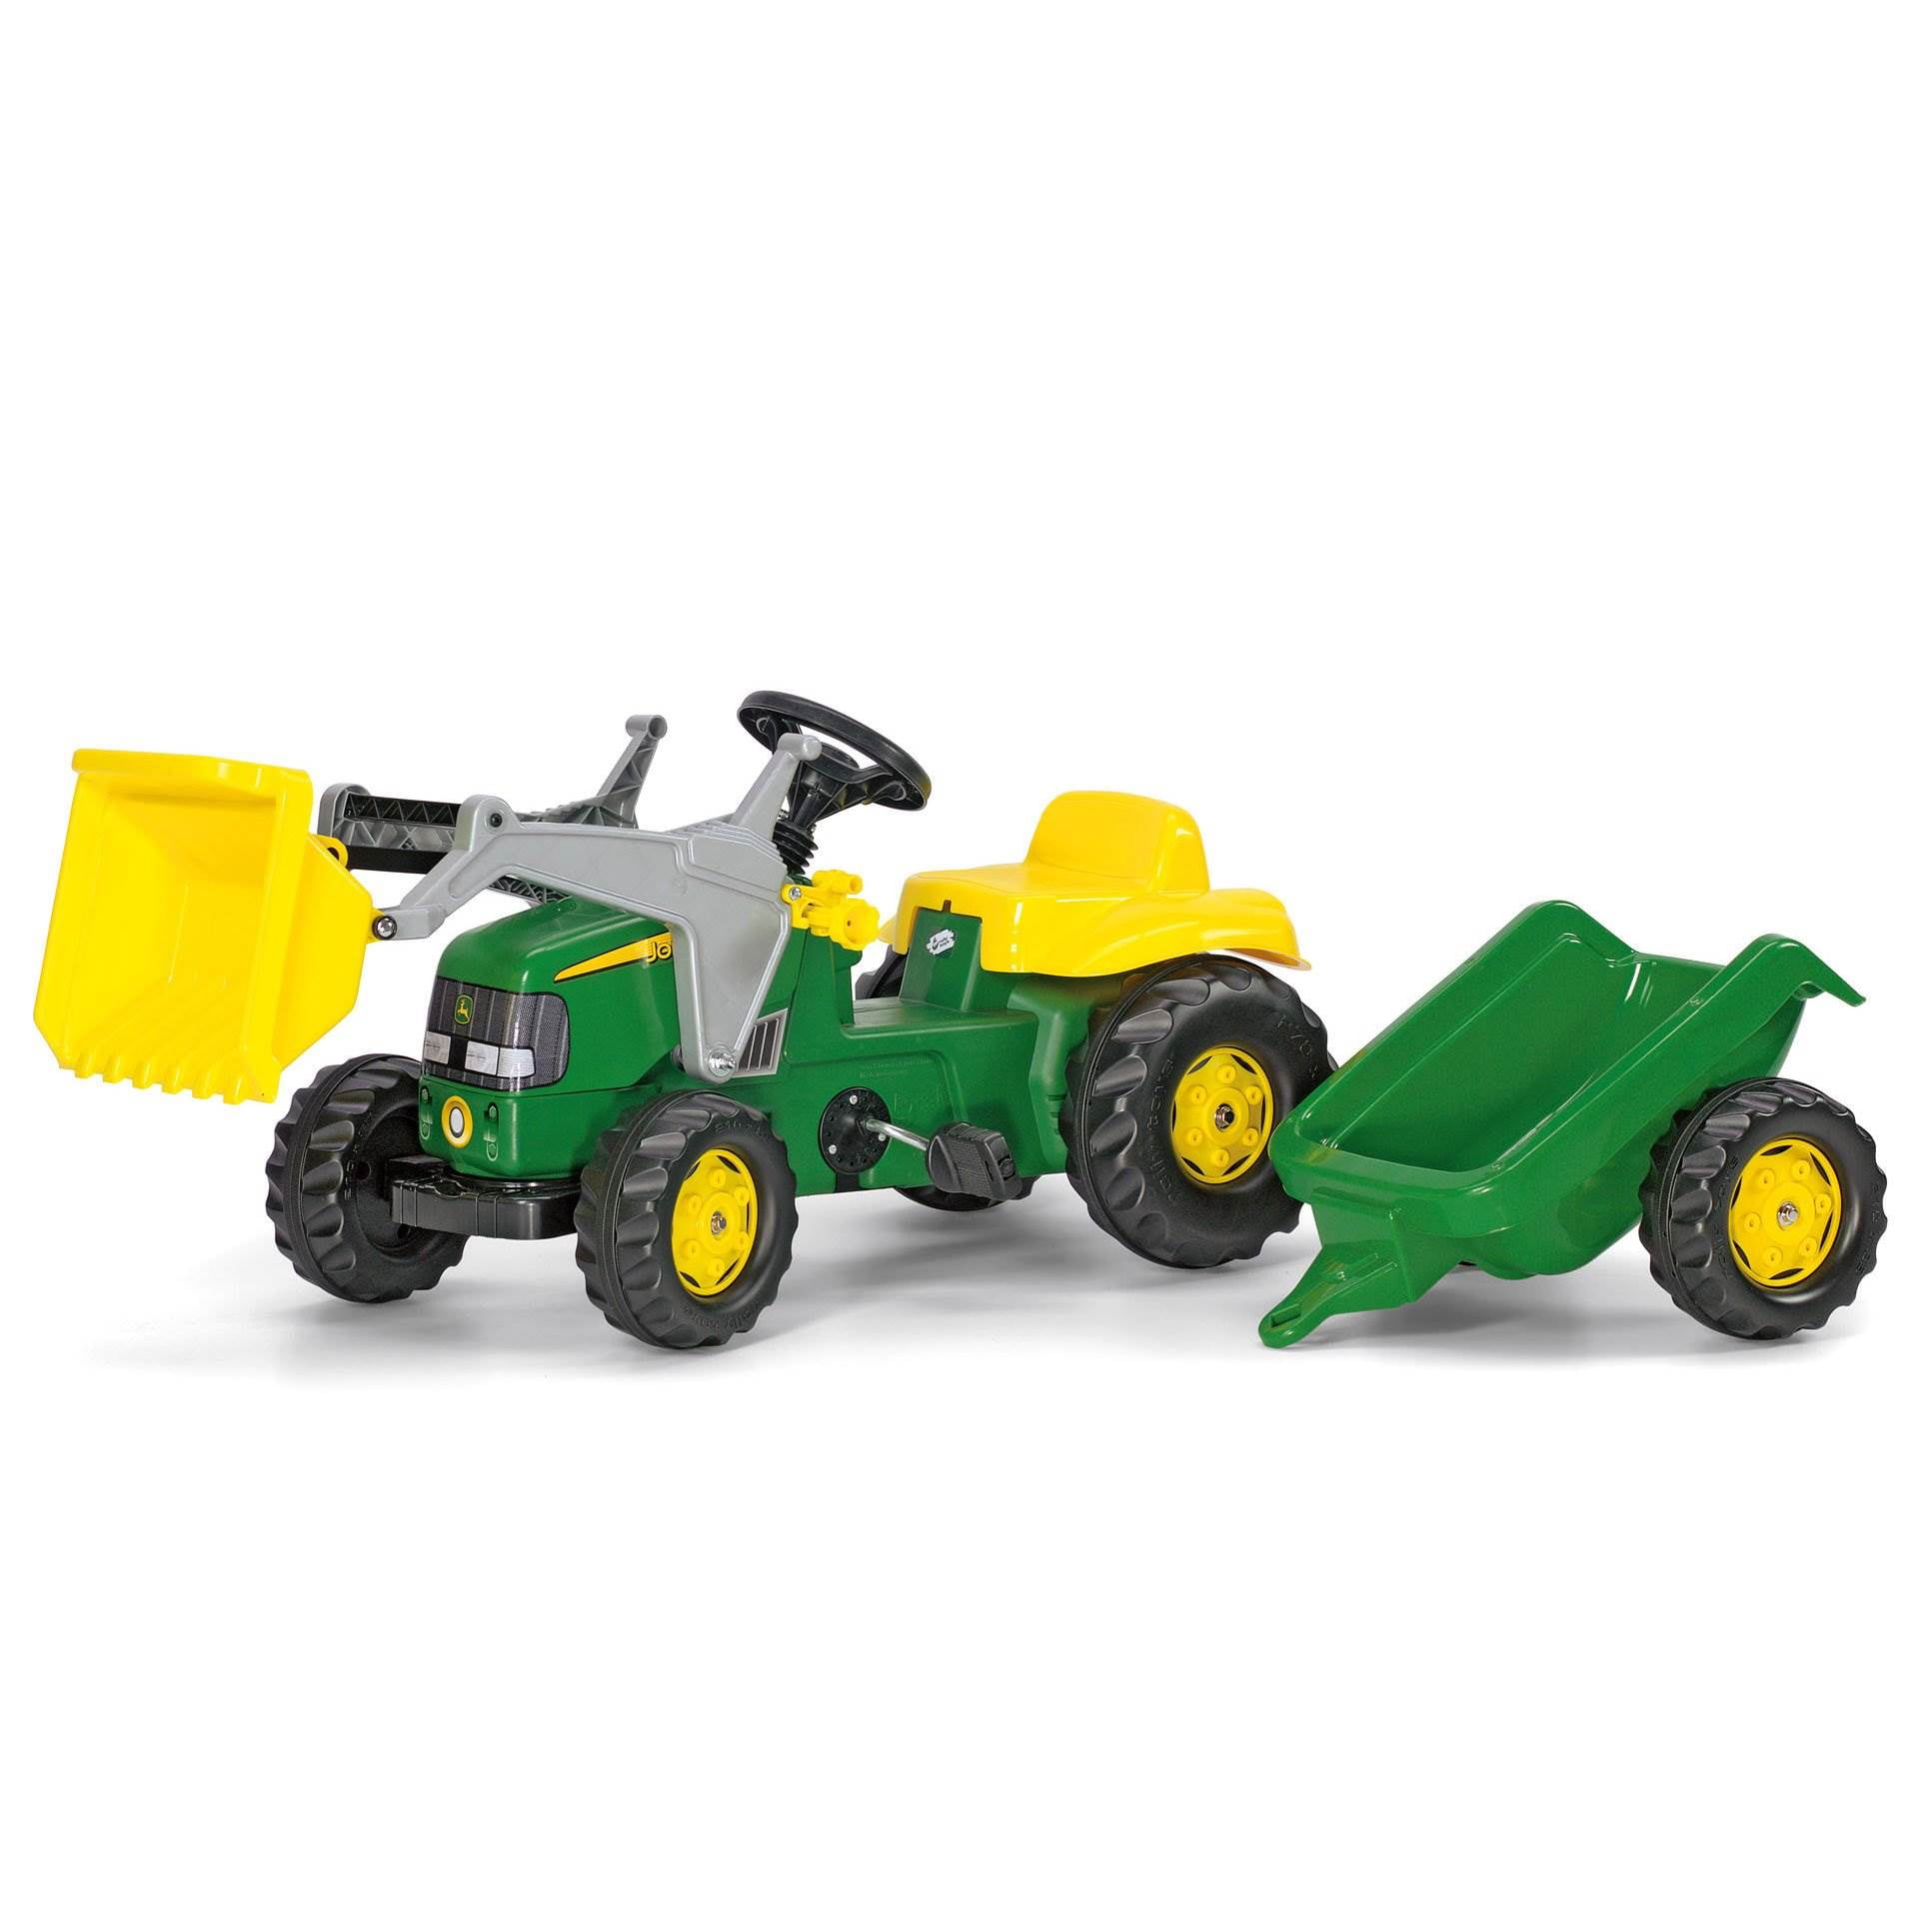 Ride-on Toy For Kids Dolu Toys Pedal Operated Big Green Tractor With Trailer 